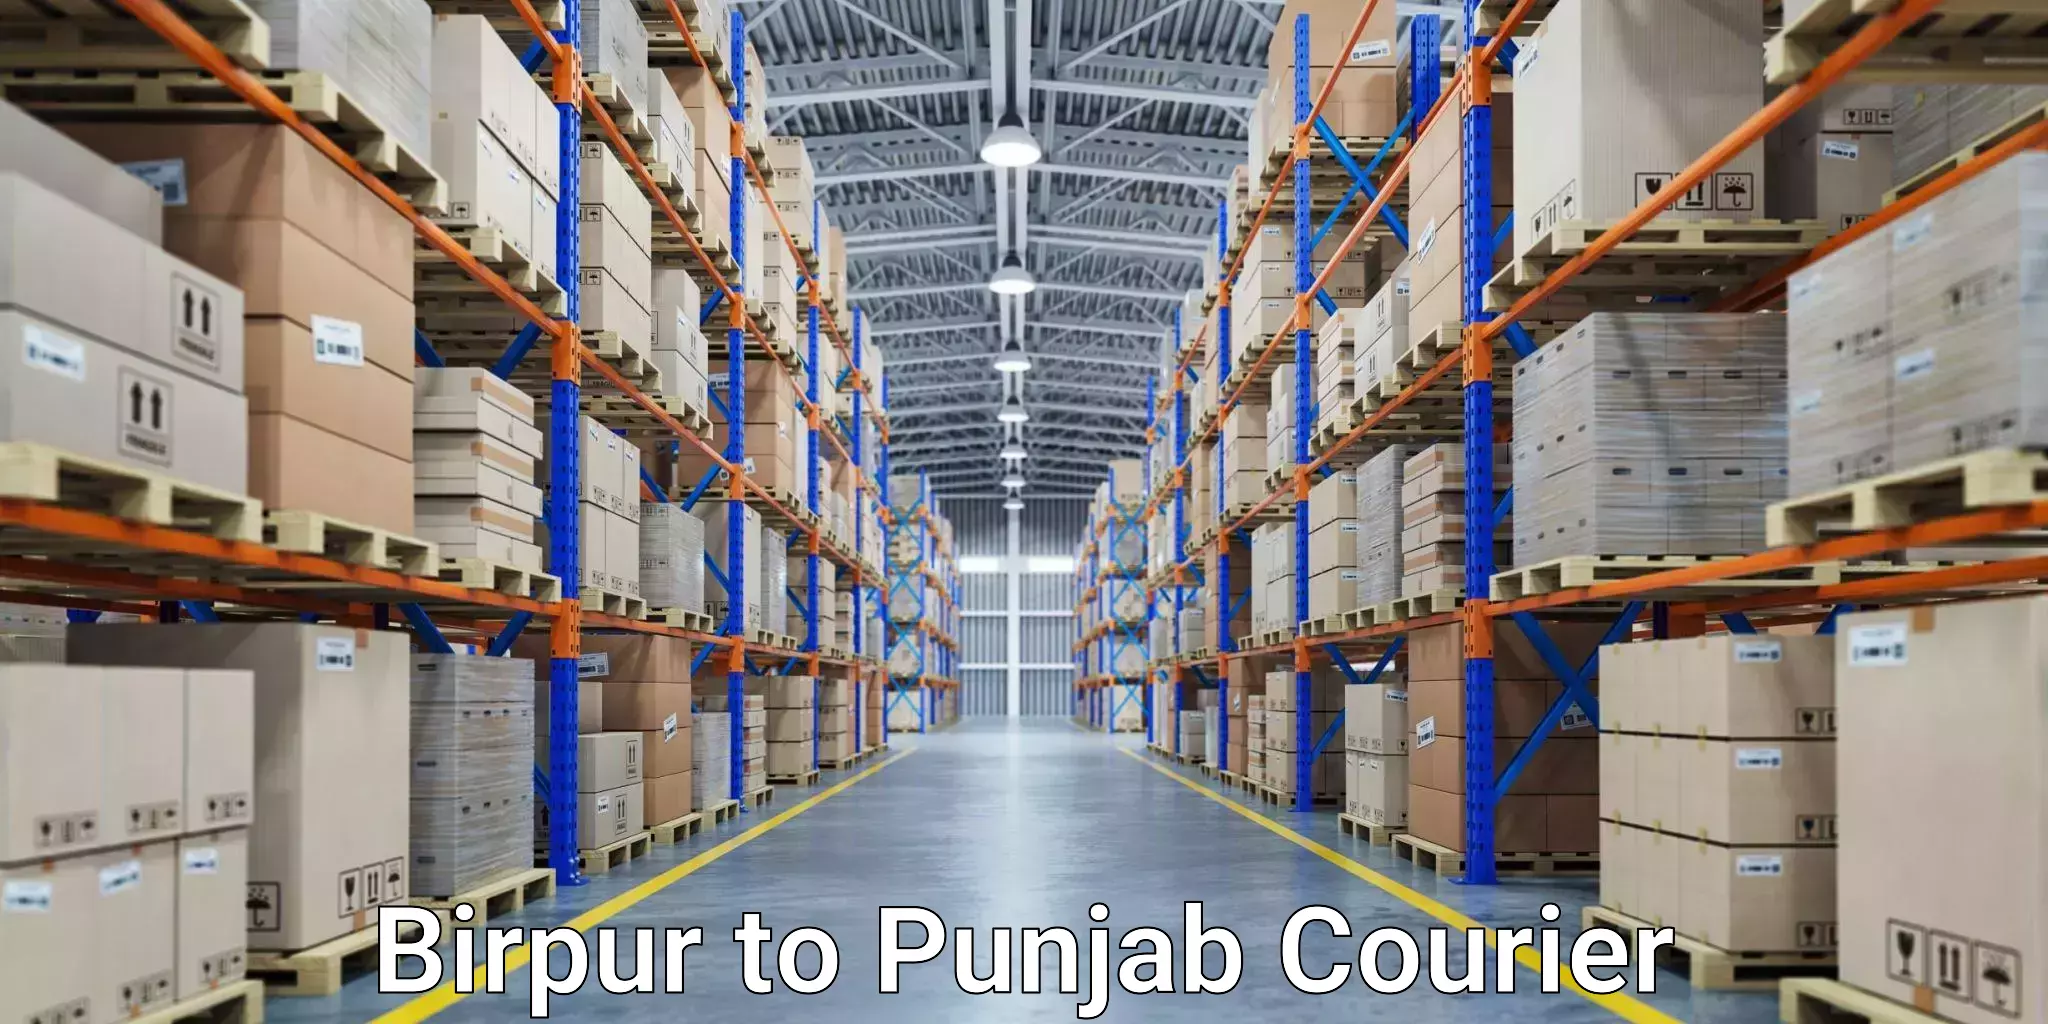 Customer-oriented courier services Birpur to Faridkot